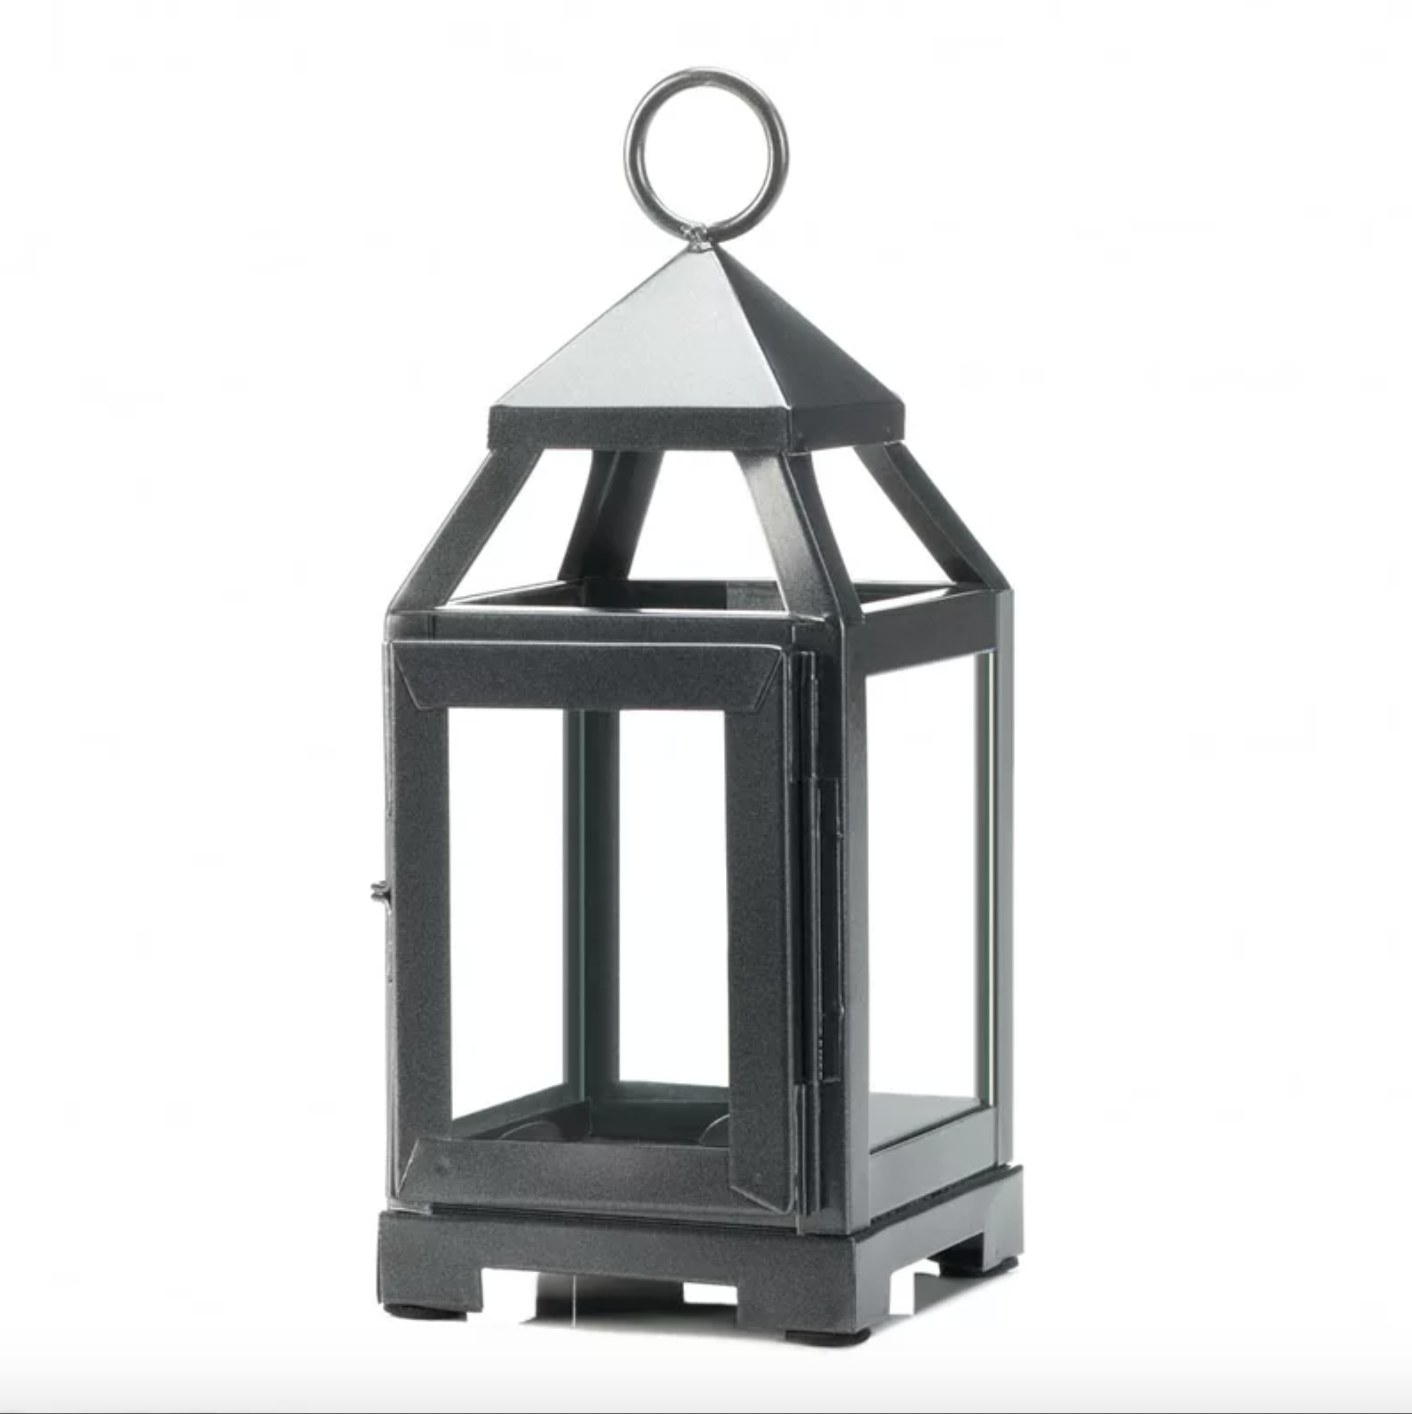 The lantern in silver